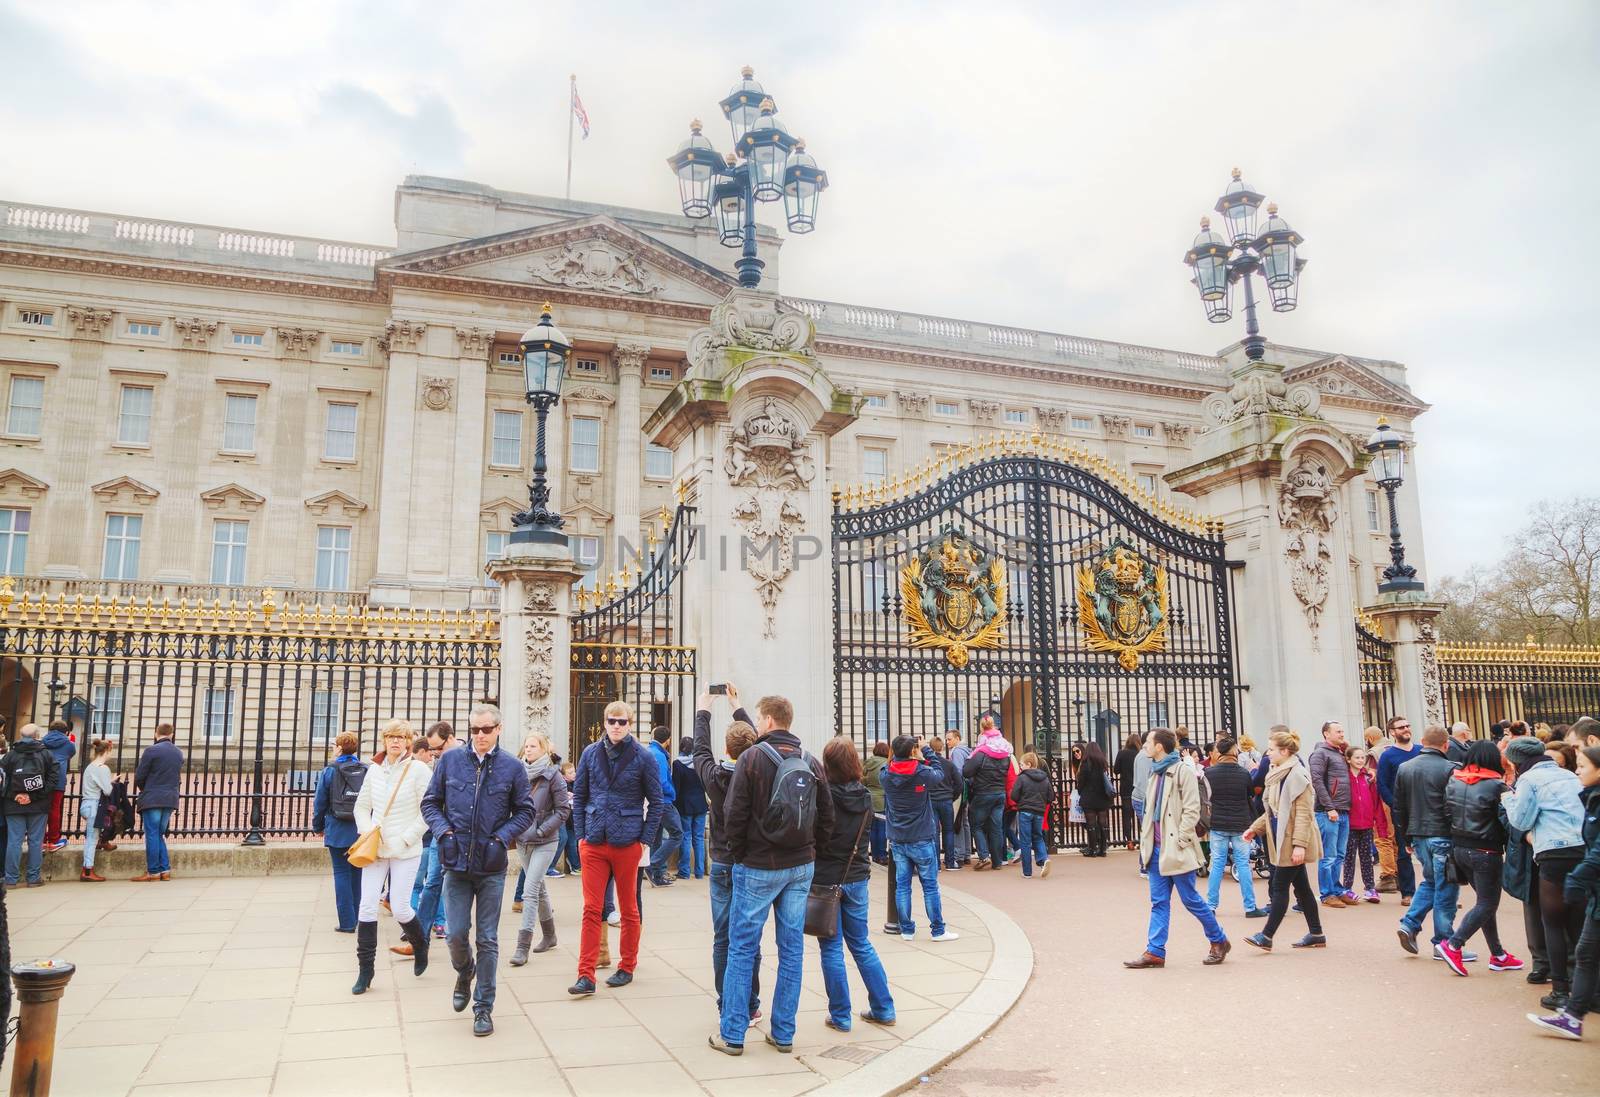 LONDON - APRIL 5: Buckingham palace with crowd of tourists on April 5, 2015 in London, UK. It's the London residence and principal workplace of the monarchy of the United Kingdom.